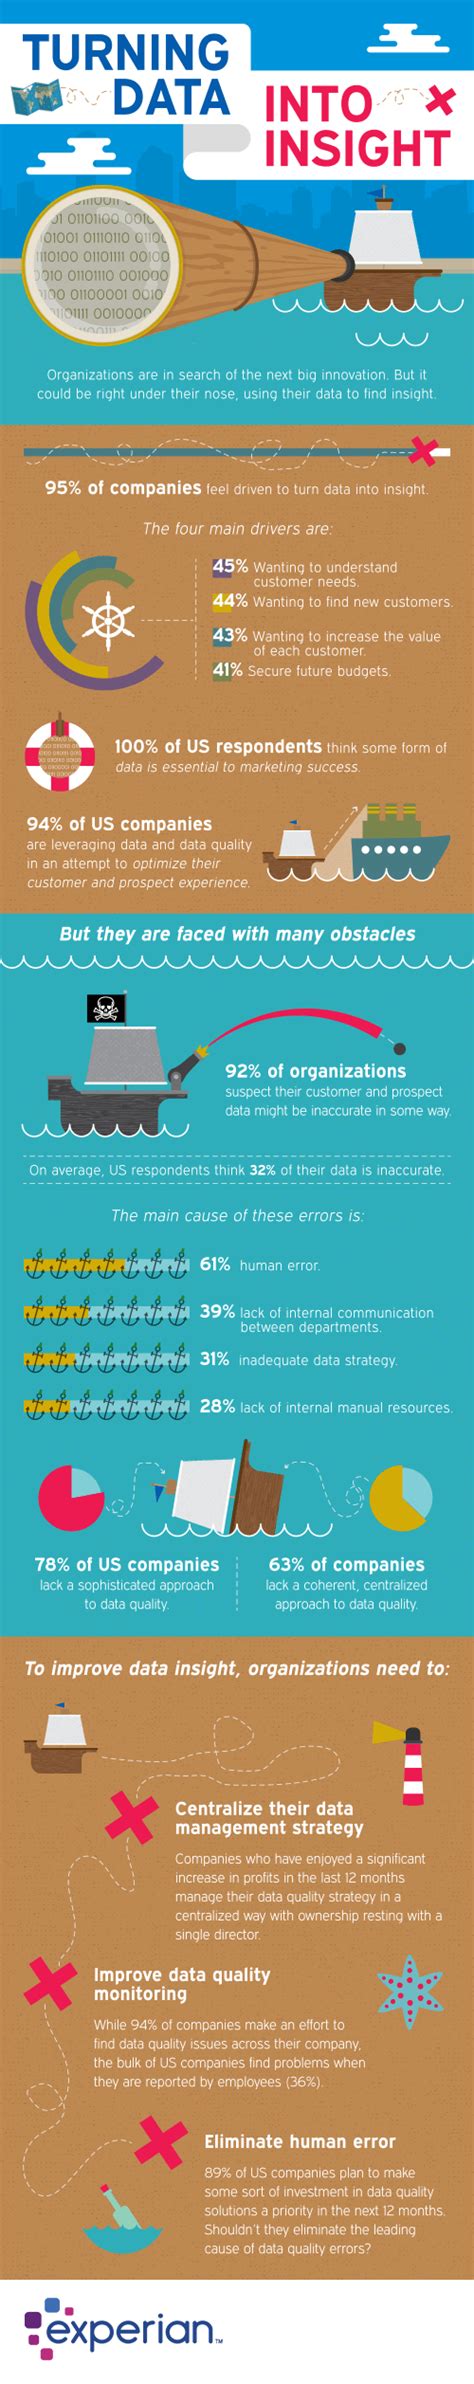 Turning Data Into Insight Infographic Experian